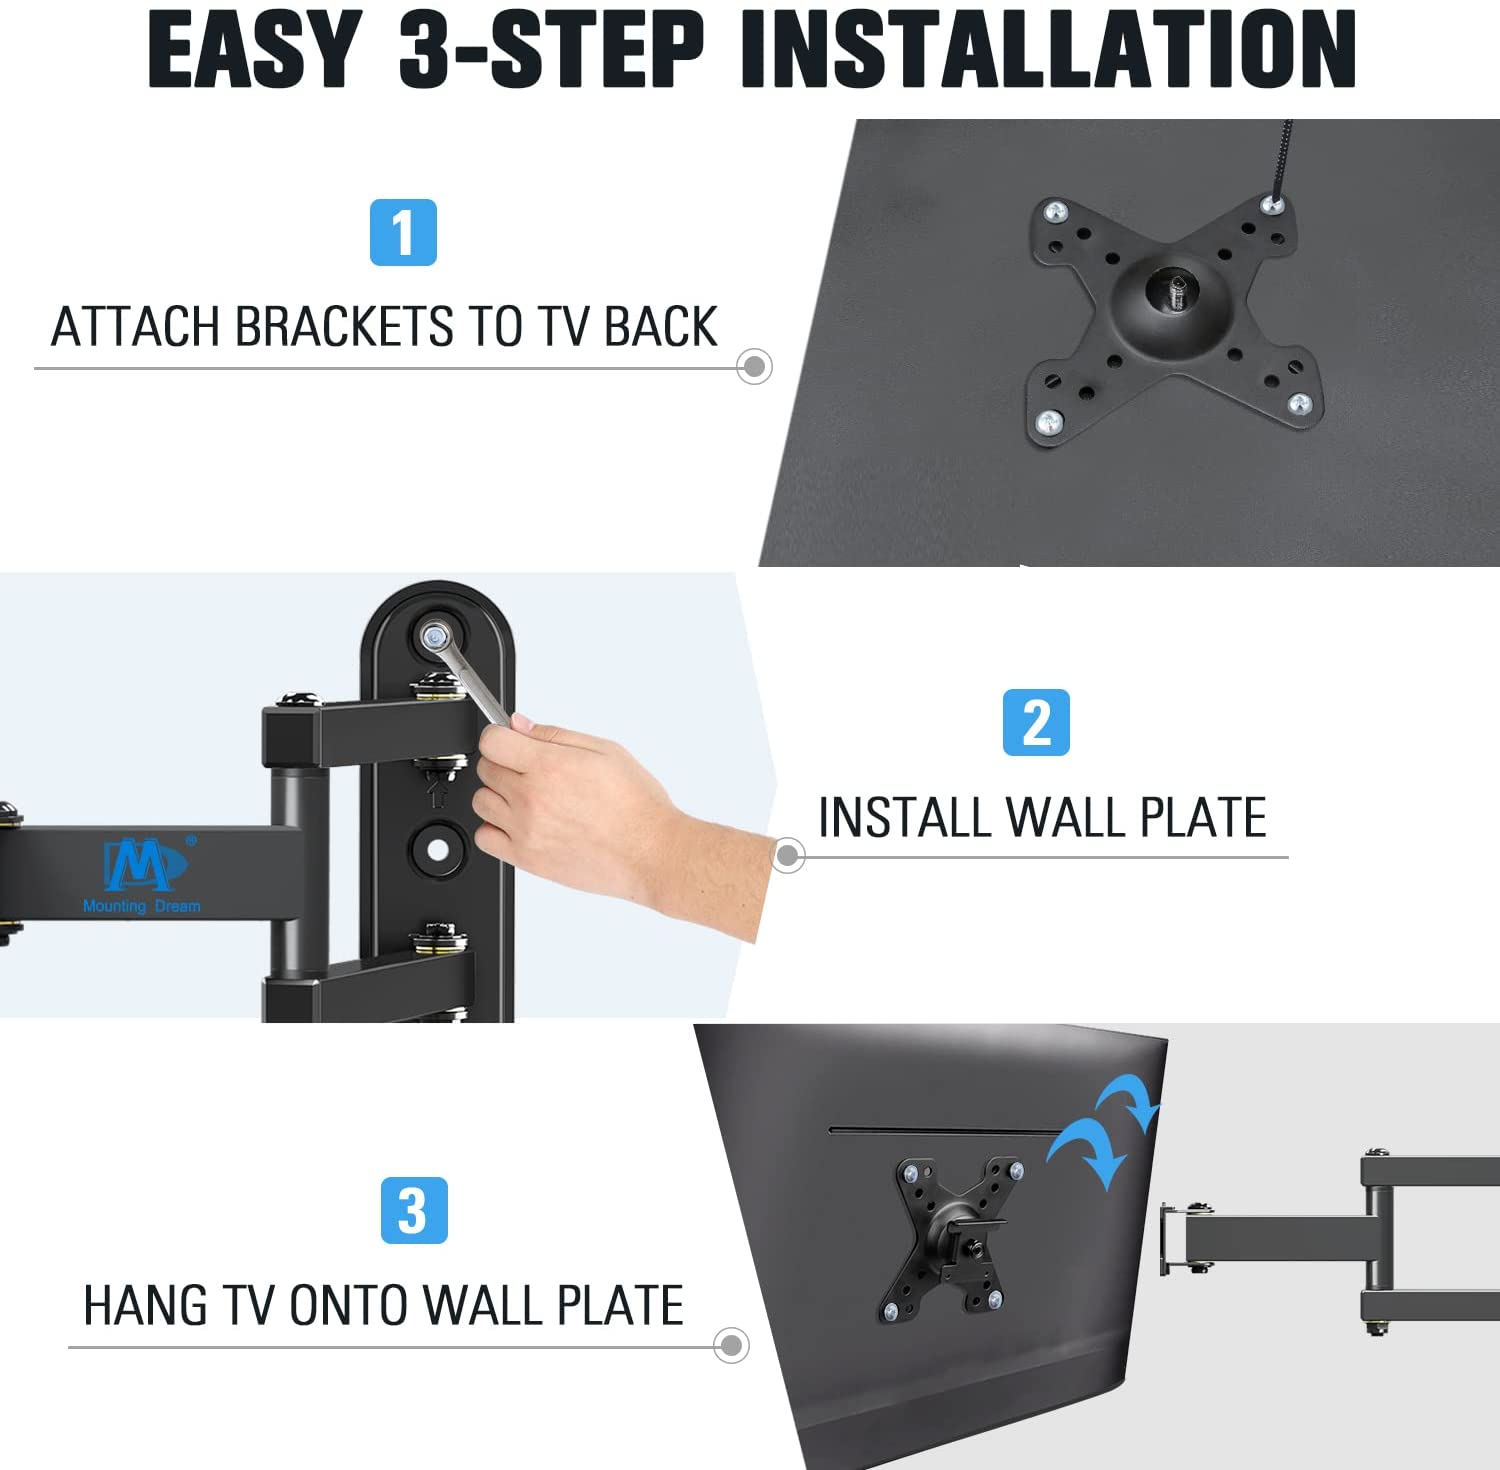 install the TV mount in easy 3 steps